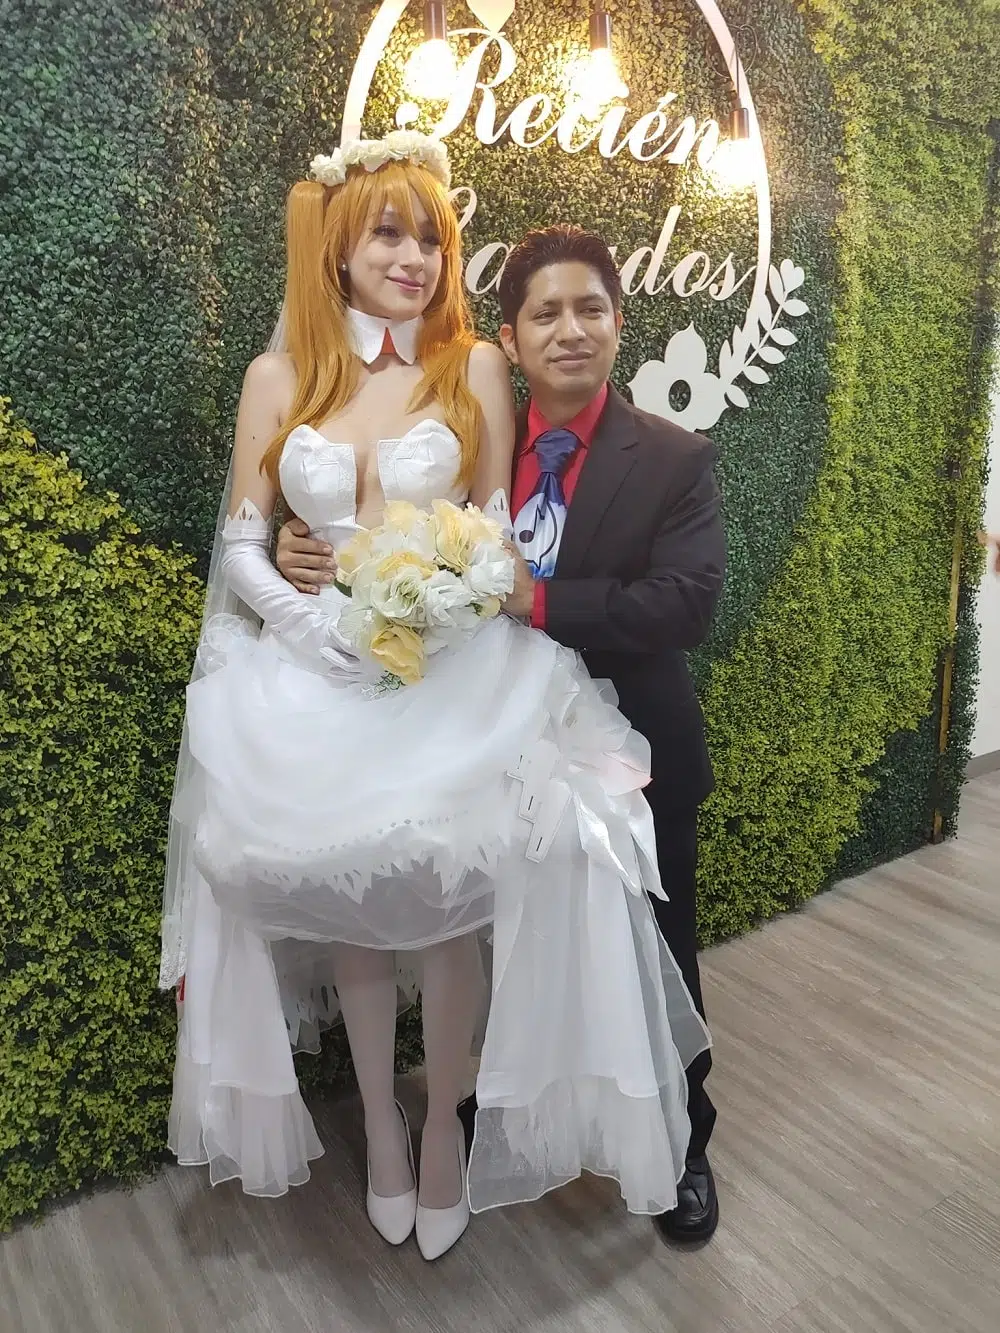 The Men Who Married Asuka of Evangelion